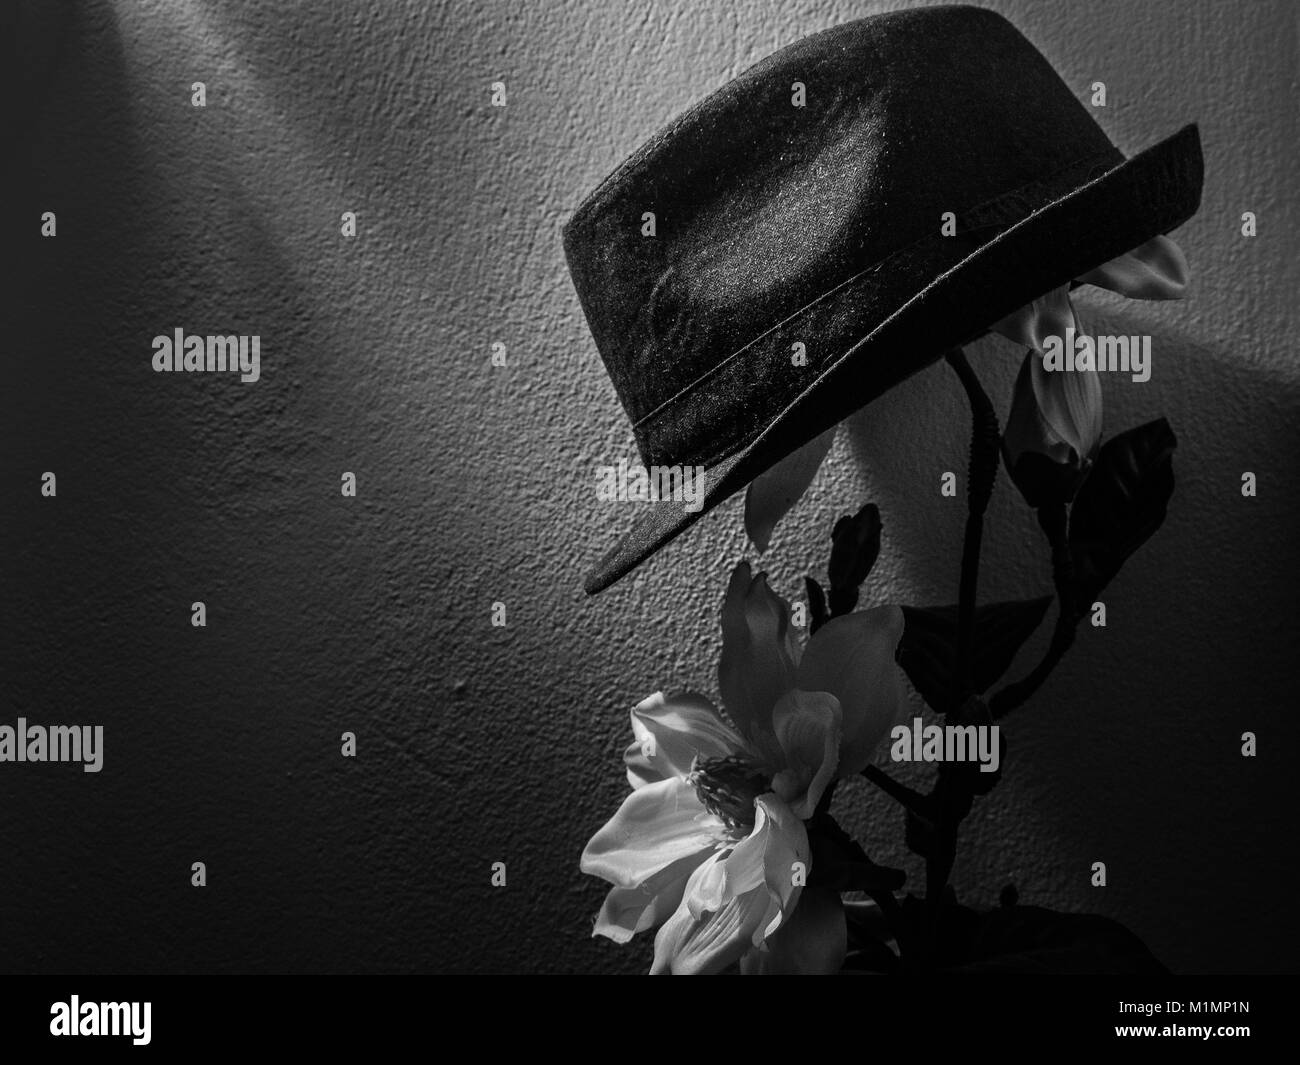 Gentleman with hat and flower artwork Stock Photo